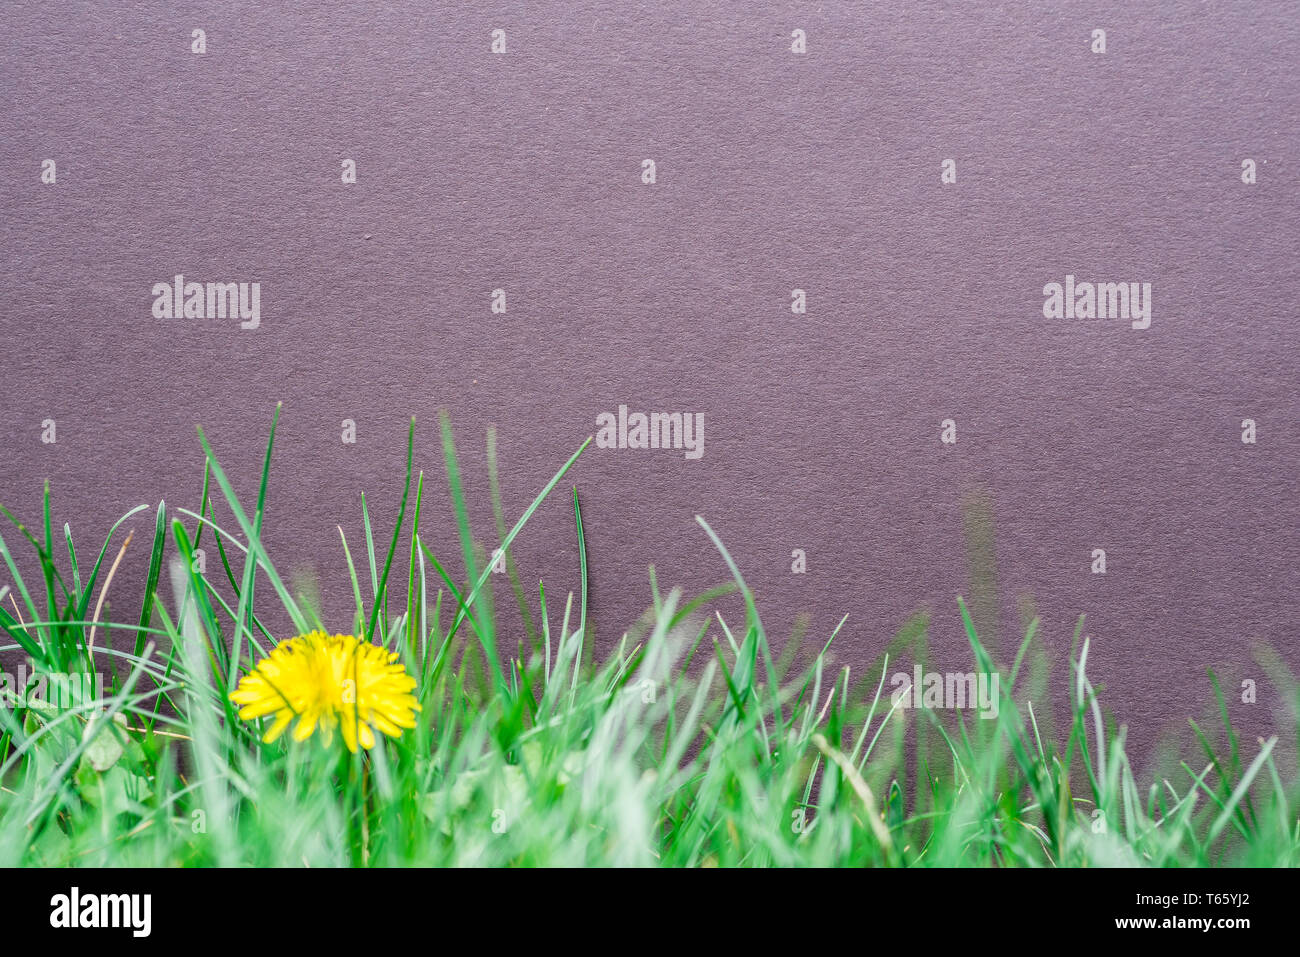 Violet paper blank on the green grass. Green grass as a frame. Stock Photo